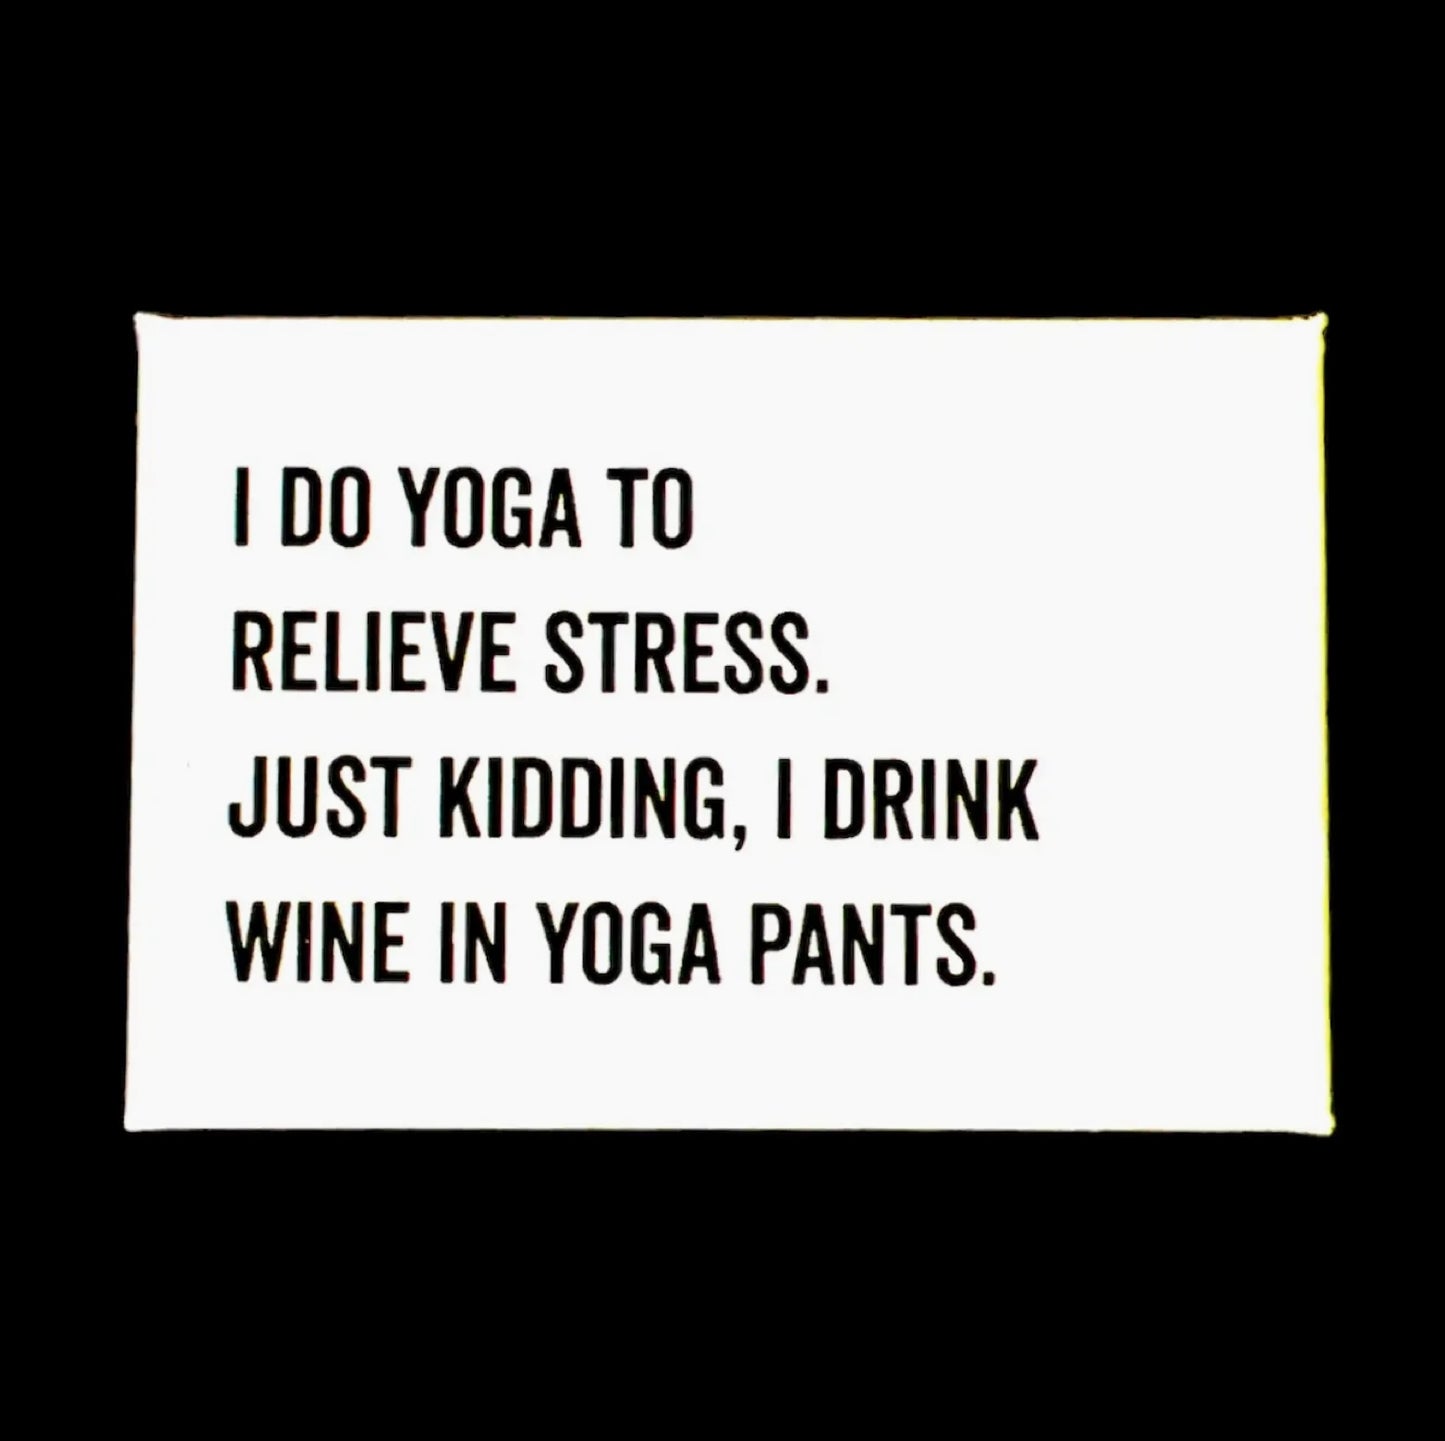 "I DO YOGA TO RELIEVE STRESS. JUST KIDDING, I DRINK WINE IN YOGA PANTS" WHITE MAGNET - WHITE